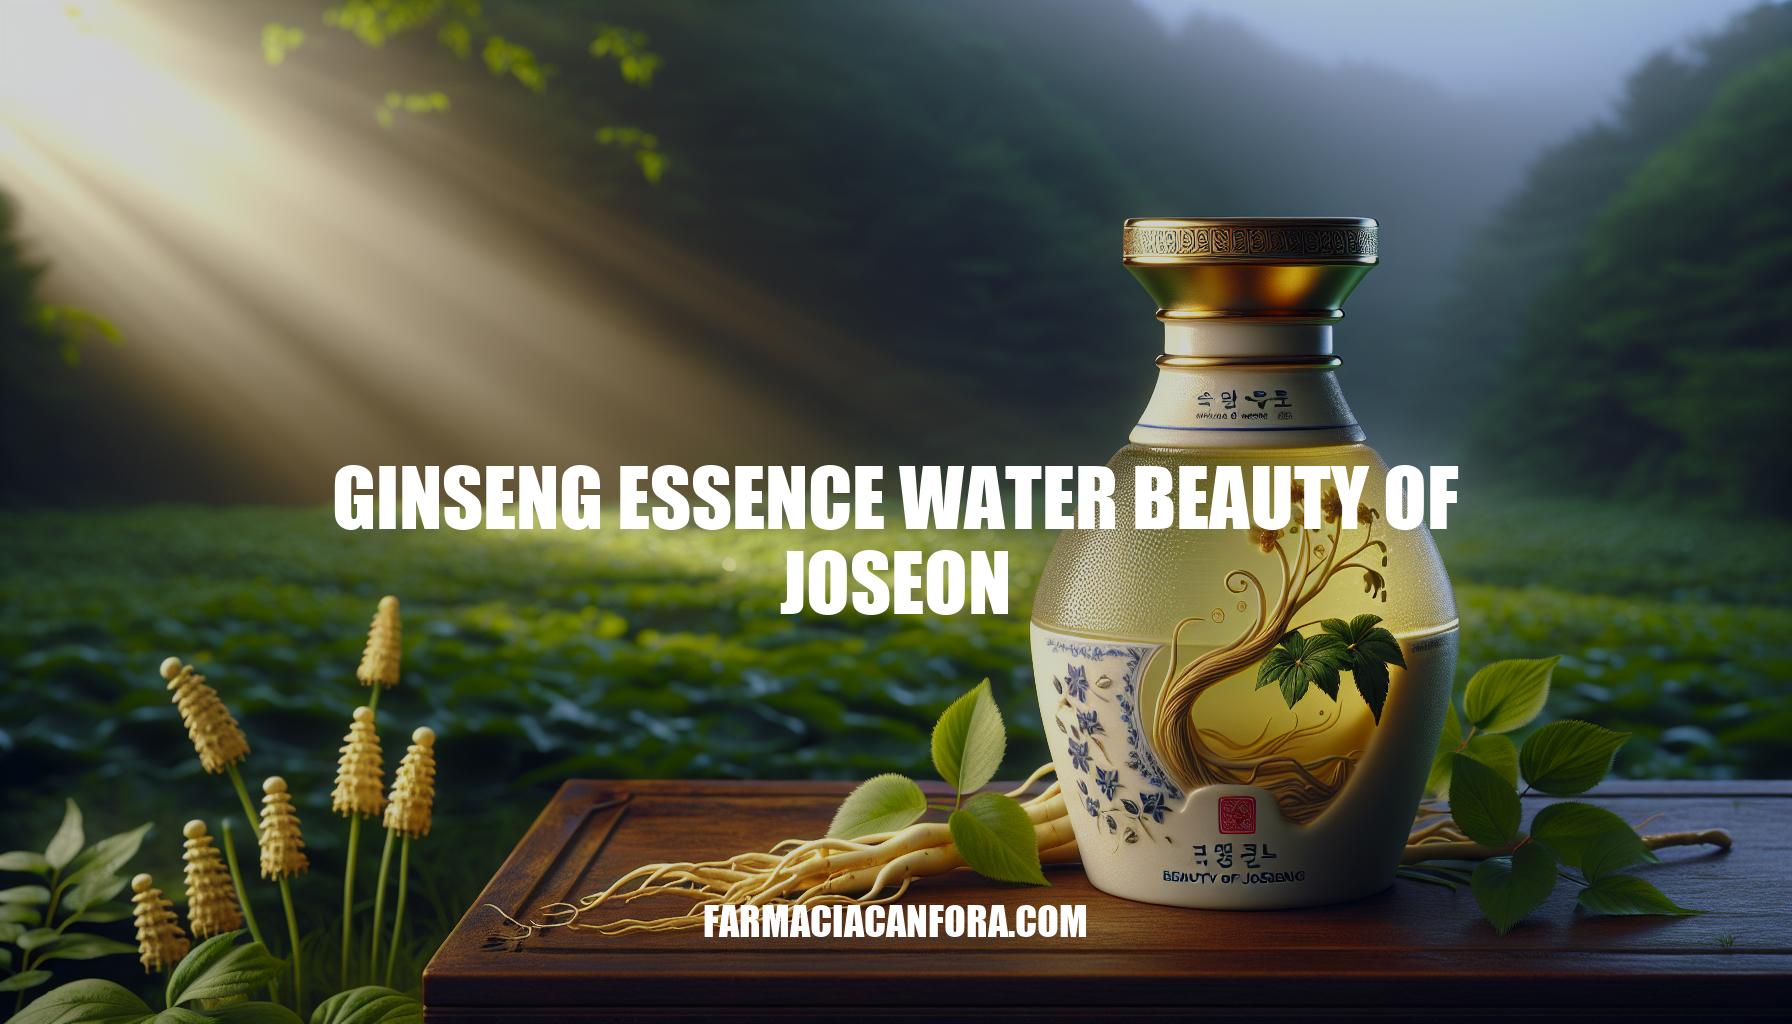 Discover the Benefits of Ginseng Essence Water Beauty of Joseon